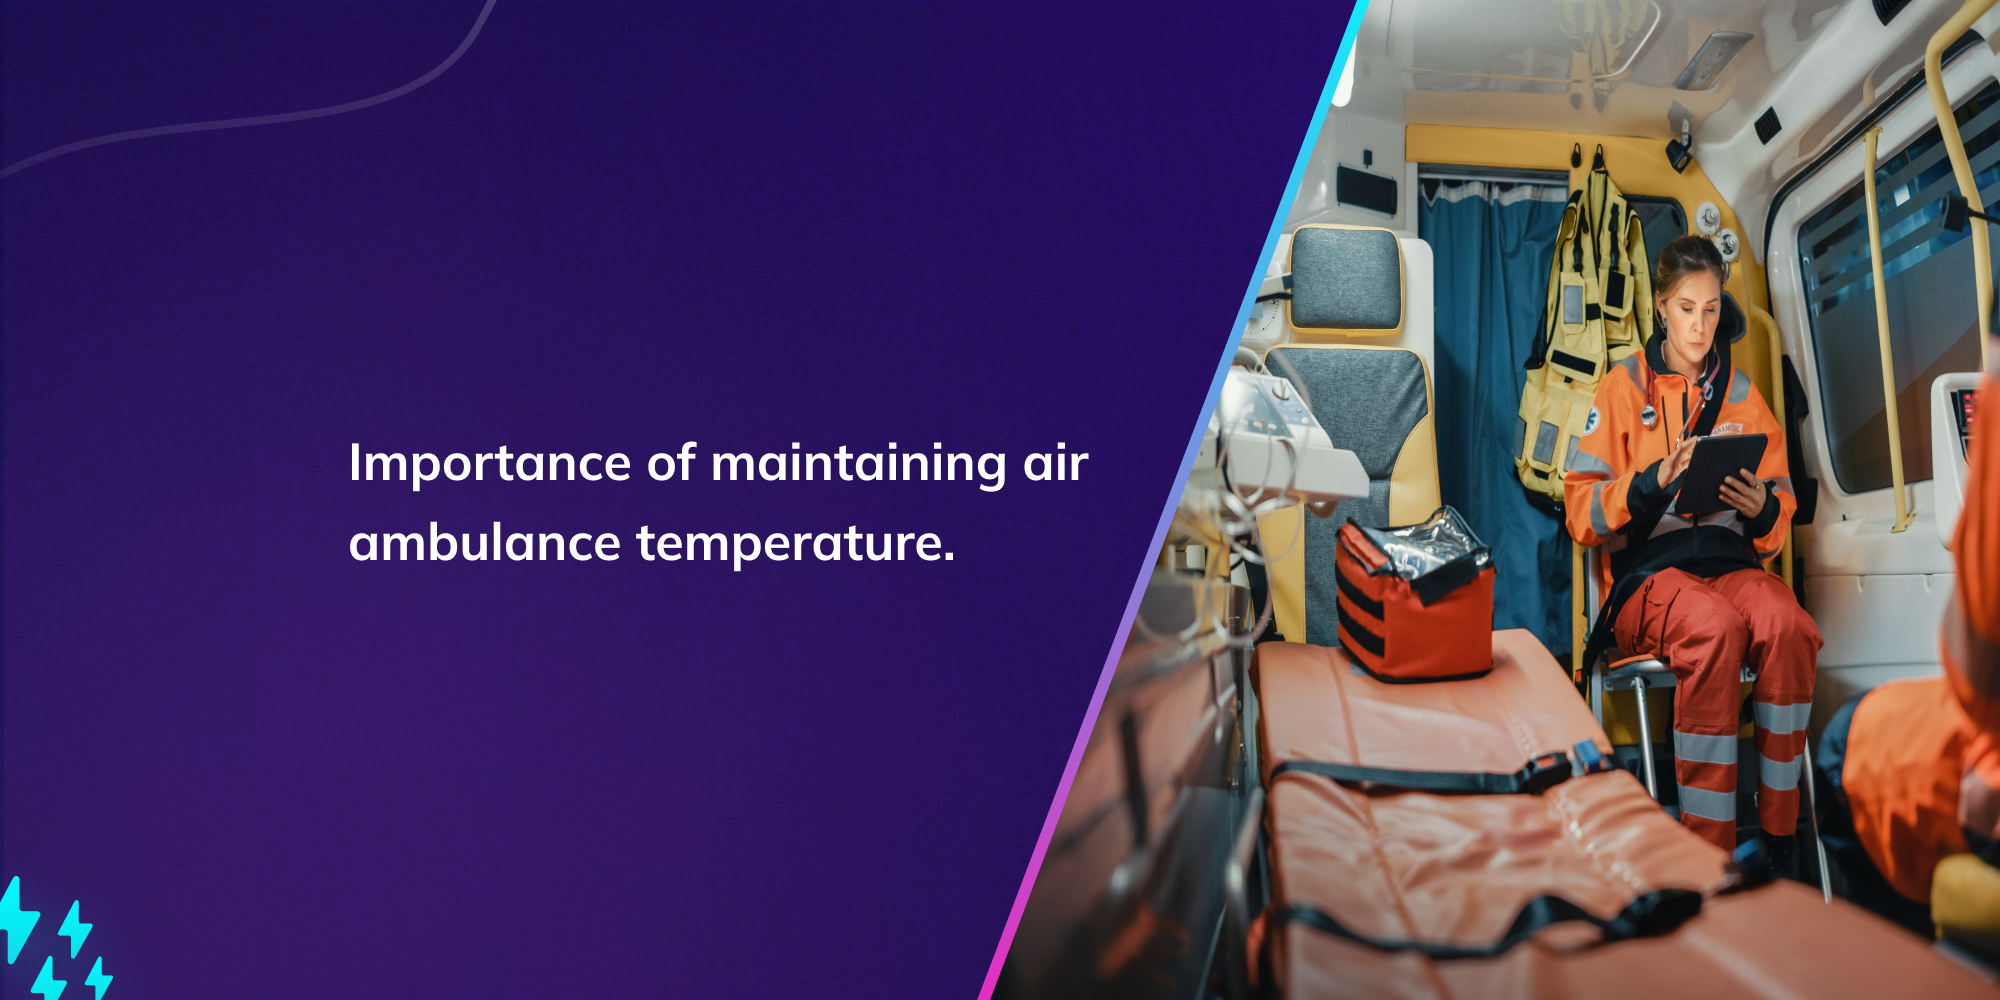 Importance of maintaining air ambulance temperature.